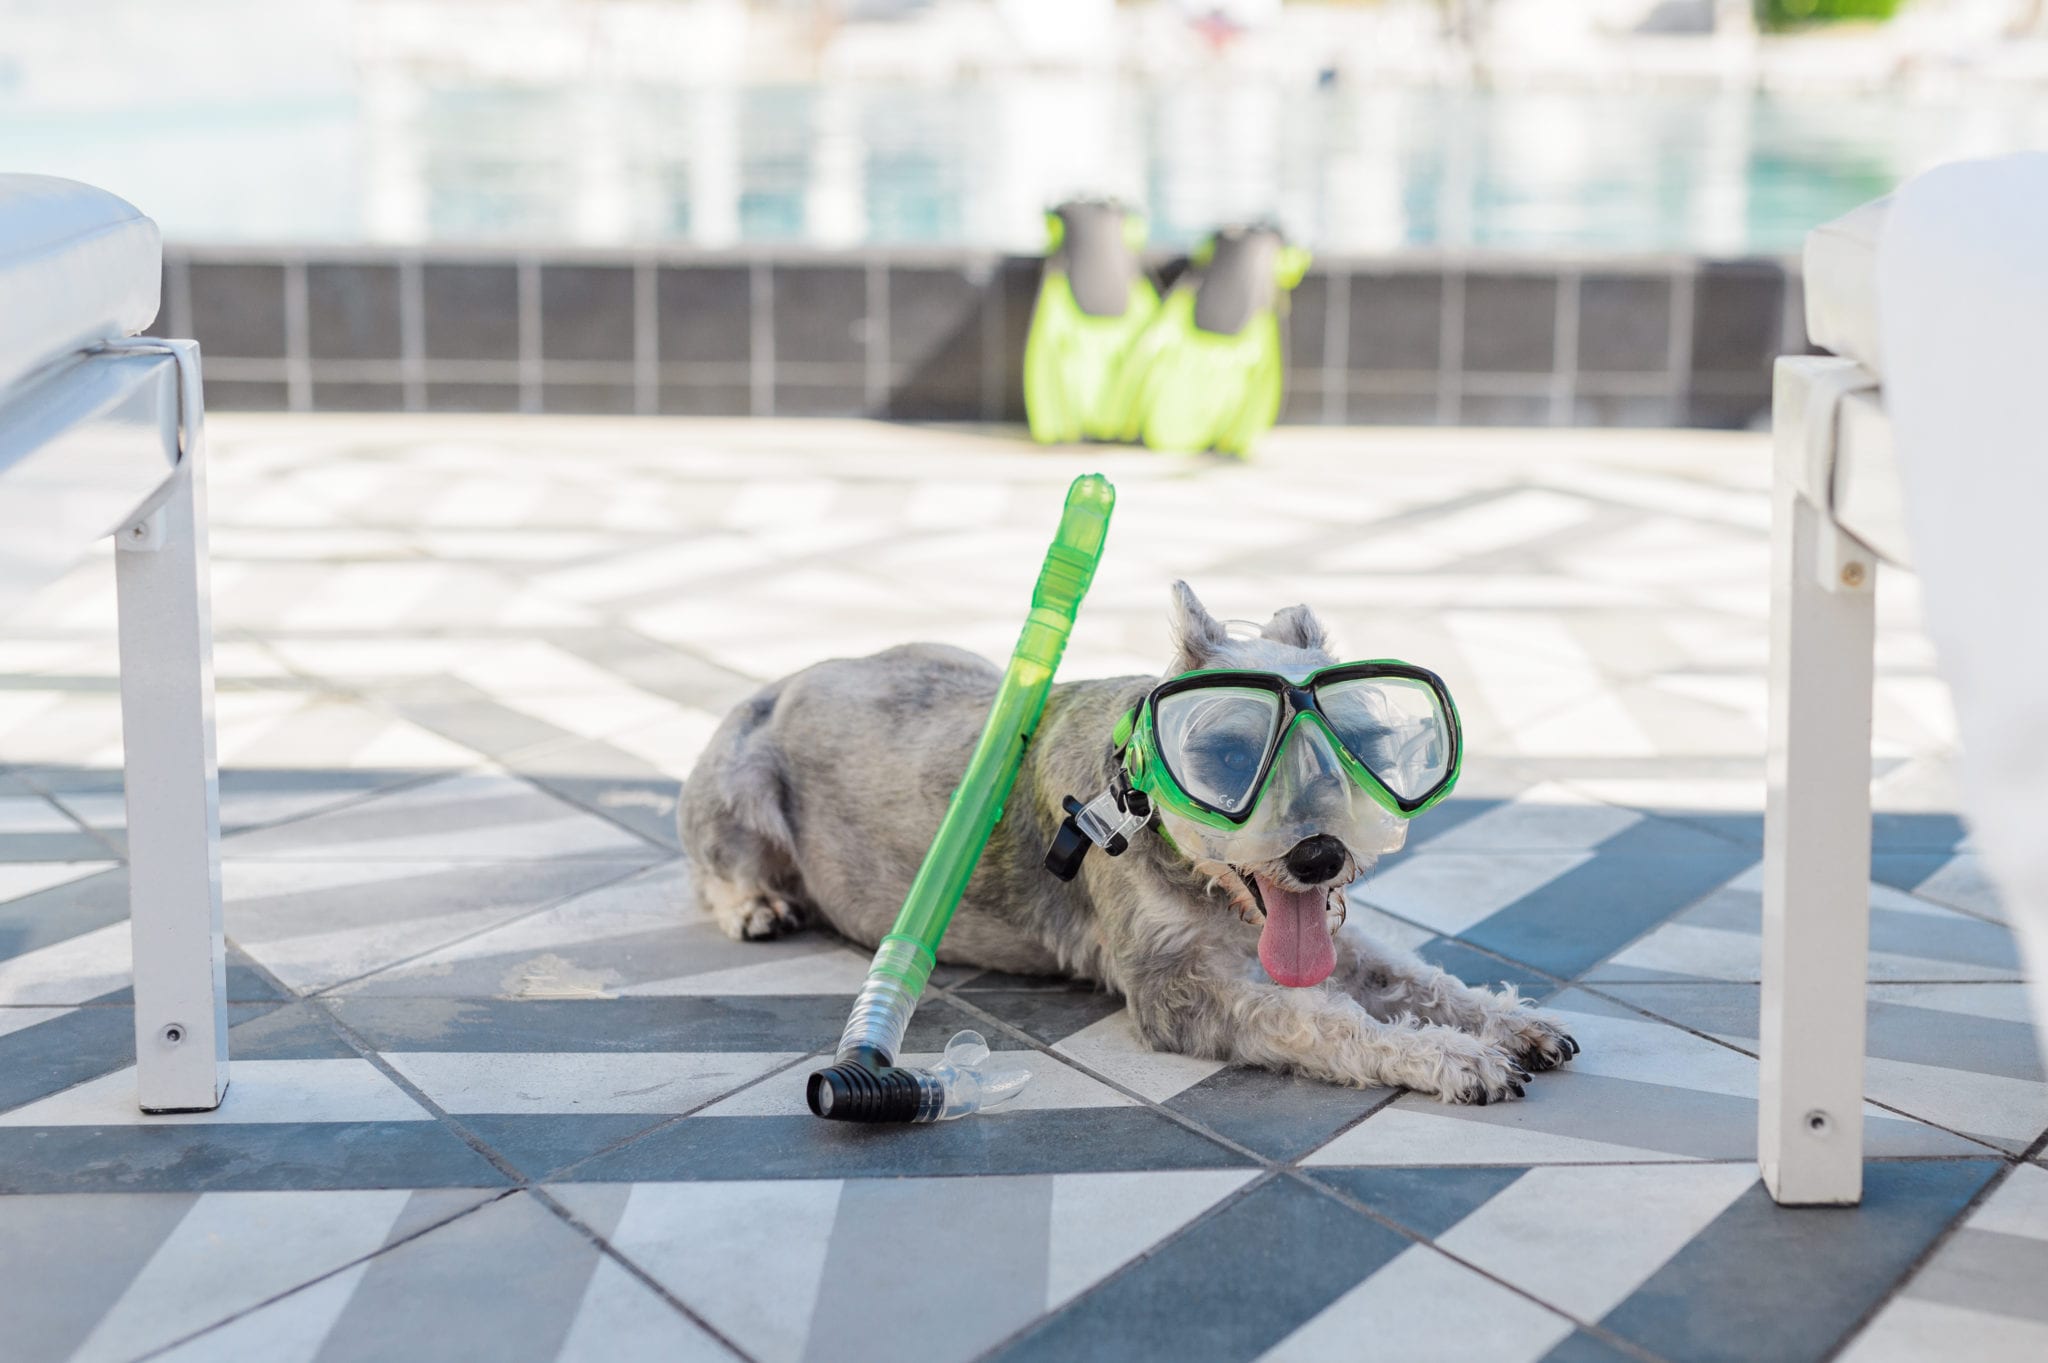 Terrier wearing scuba goggles posing for camera next to snorkel